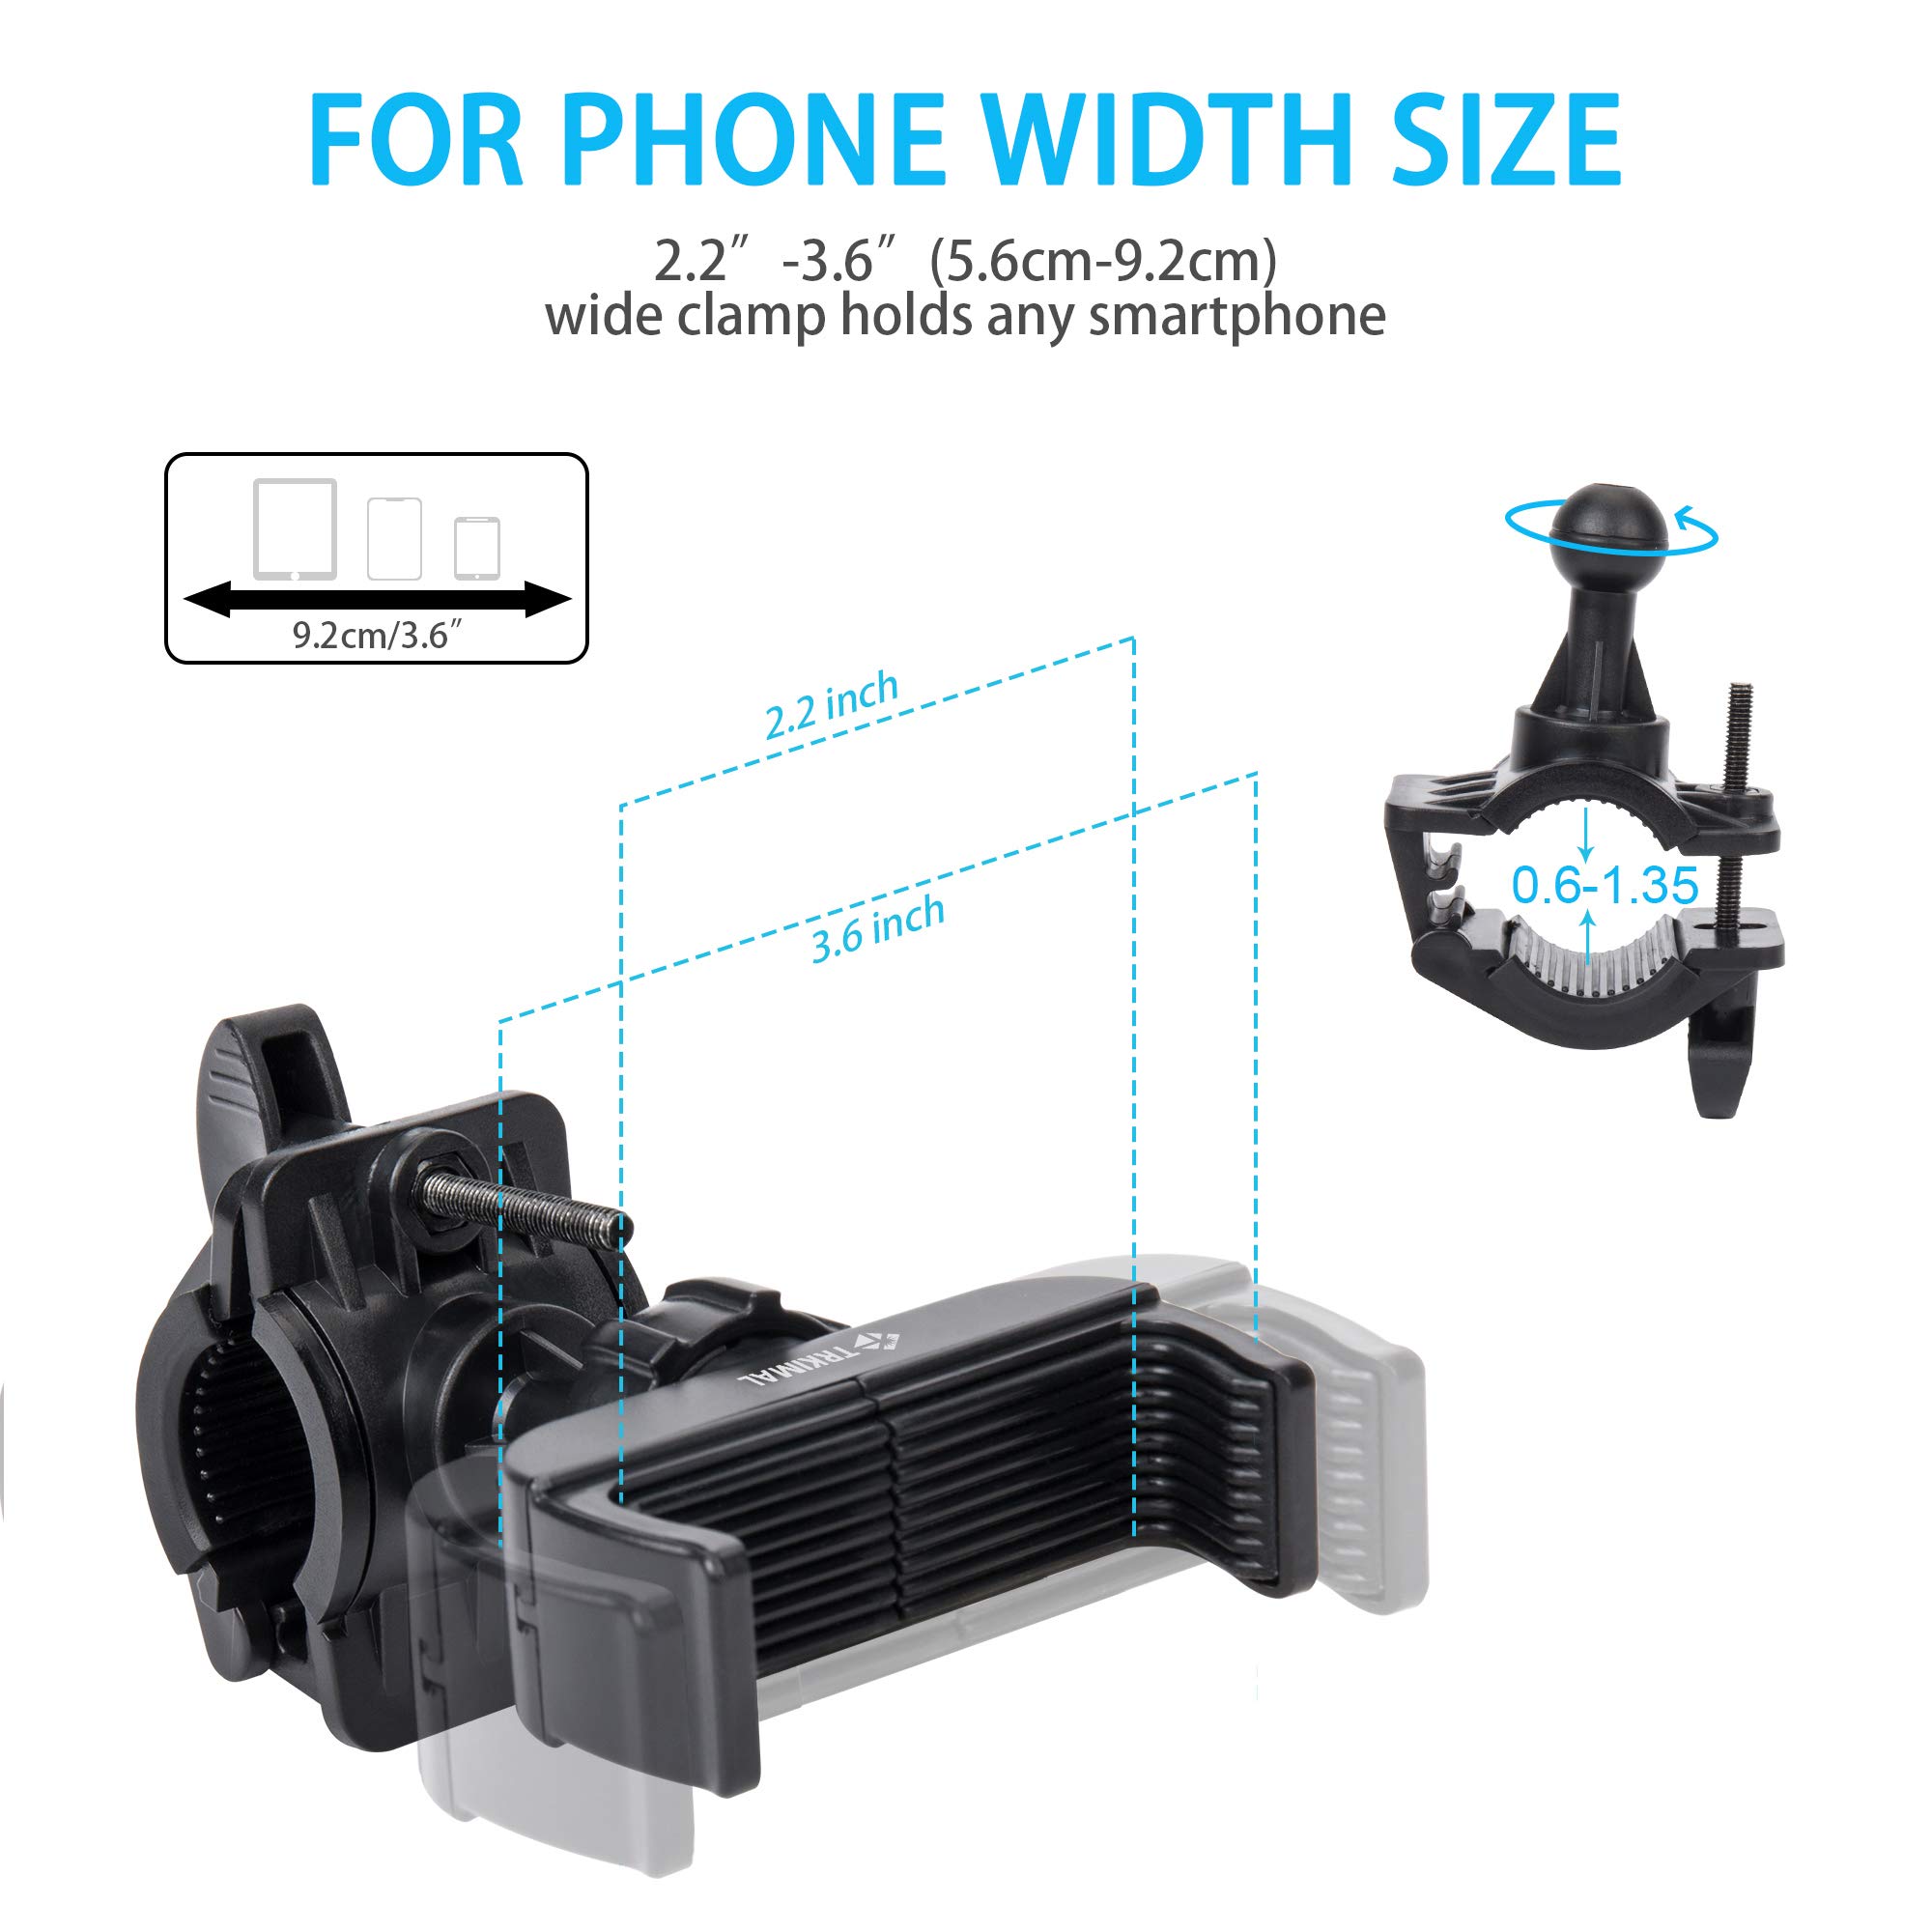 TRKIMAL Bike Phone Mount Universal Adjustable Cell Phone Holder for Bicycle Motorcycle Compatible with iPhone Max Xr Xs X Pro 12 11 8 7 Plus, Galaxy S20 S10 S9 S8 S7 Edge Note 10 9 8 7